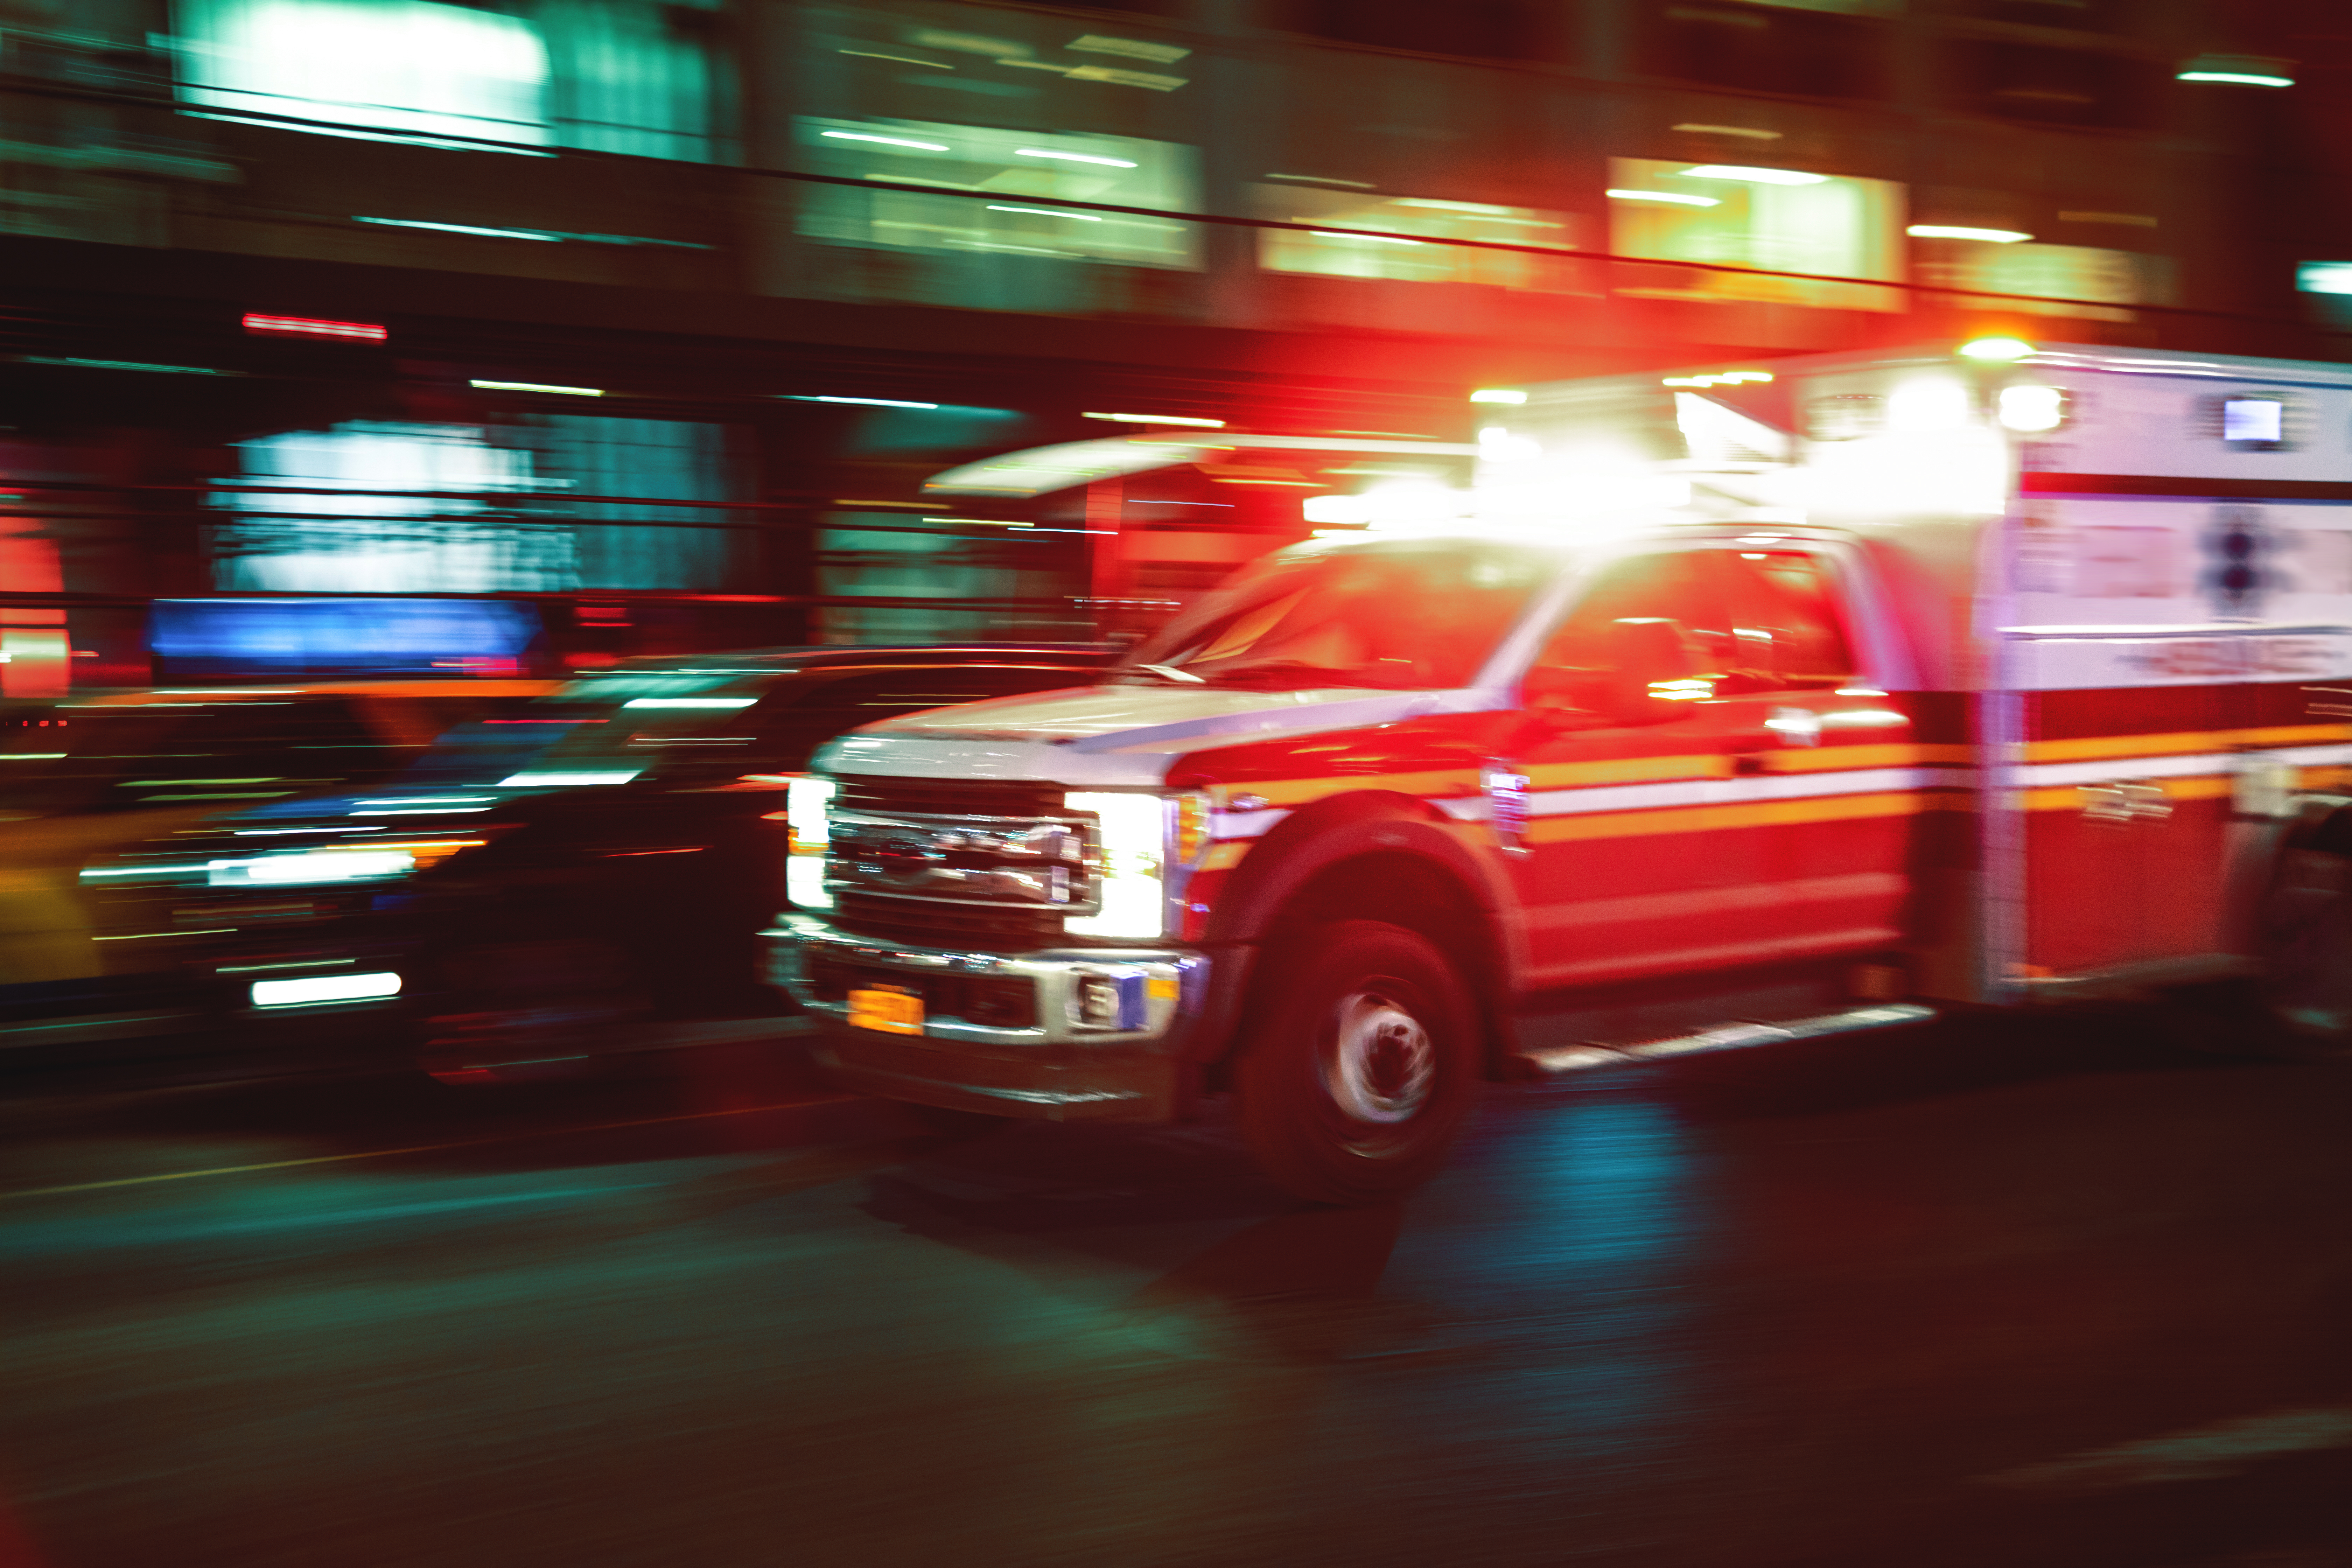 An emergency vehicle driving to the hospital.